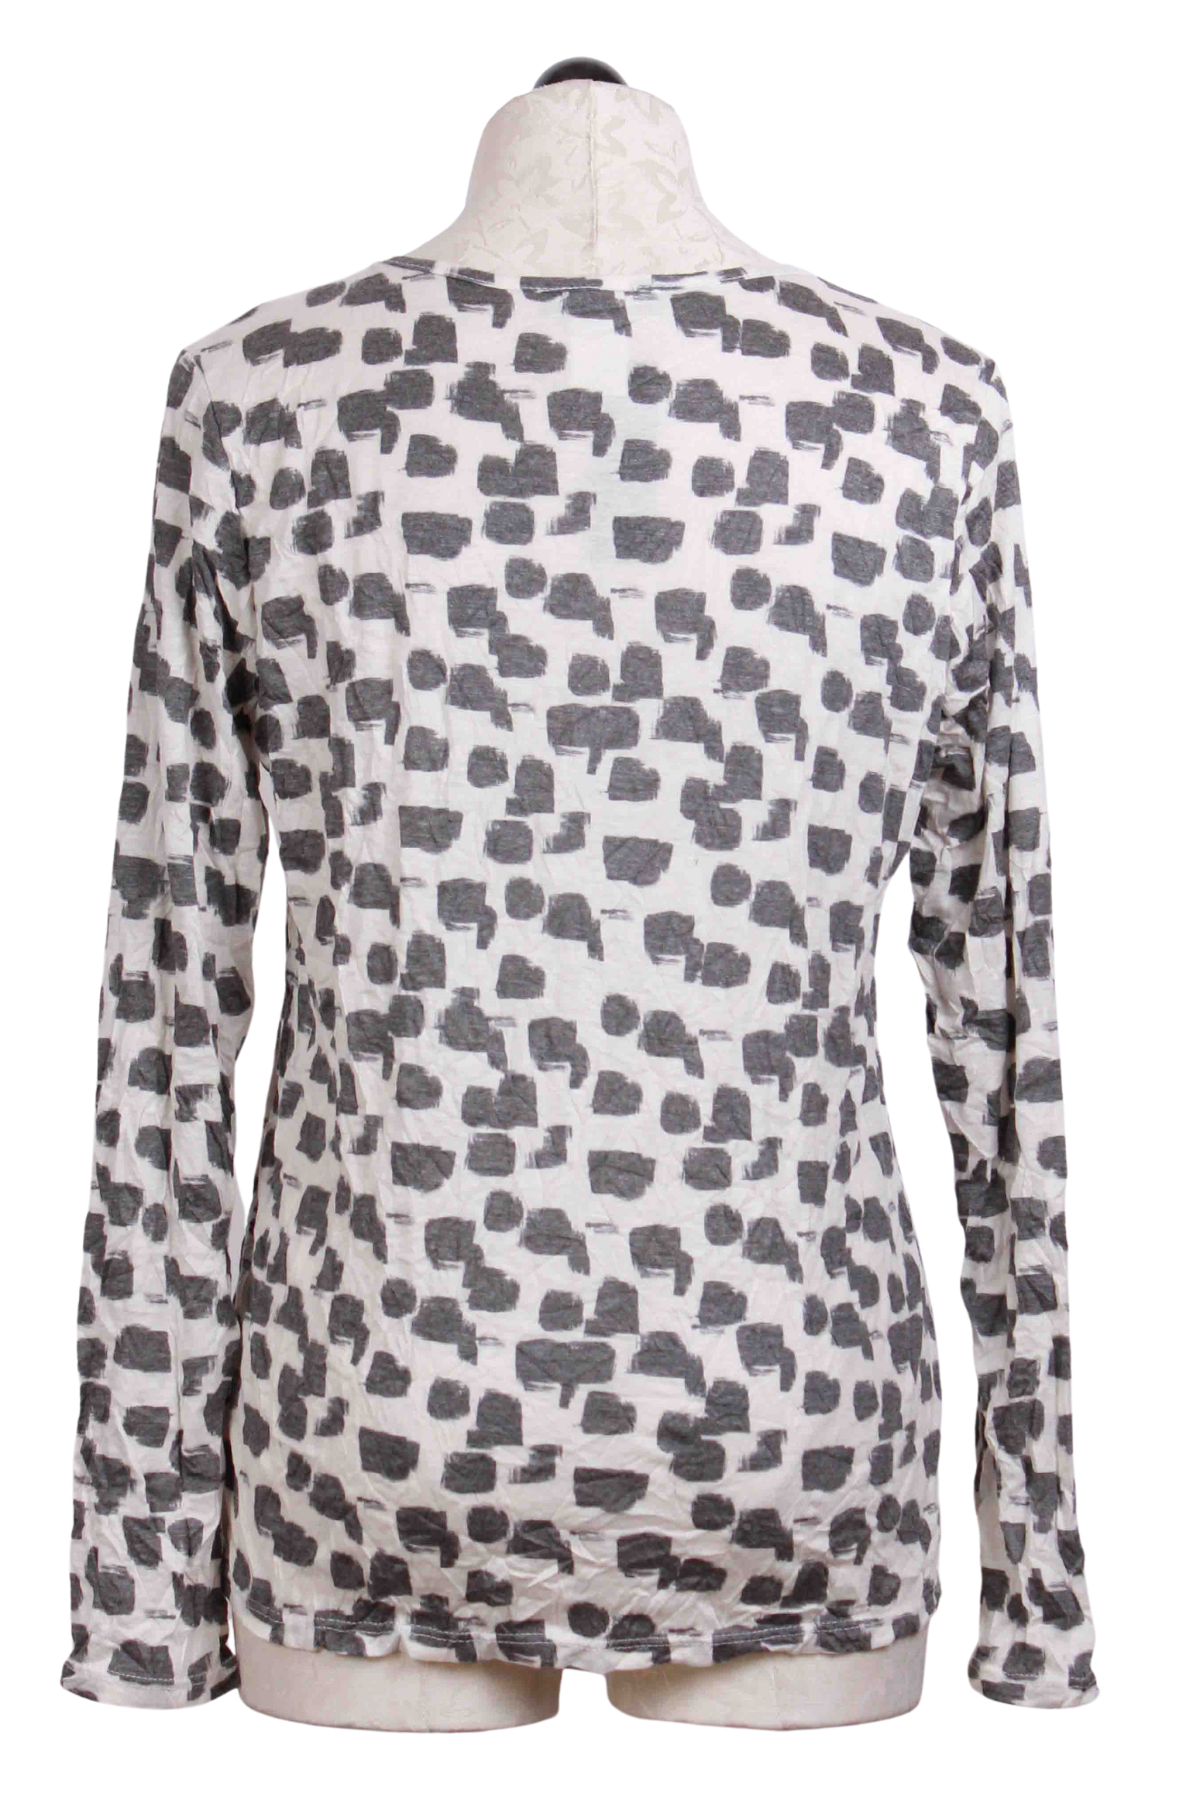 back view of Square Dot Crinkle Long Sleeve Tee by Reina Lee